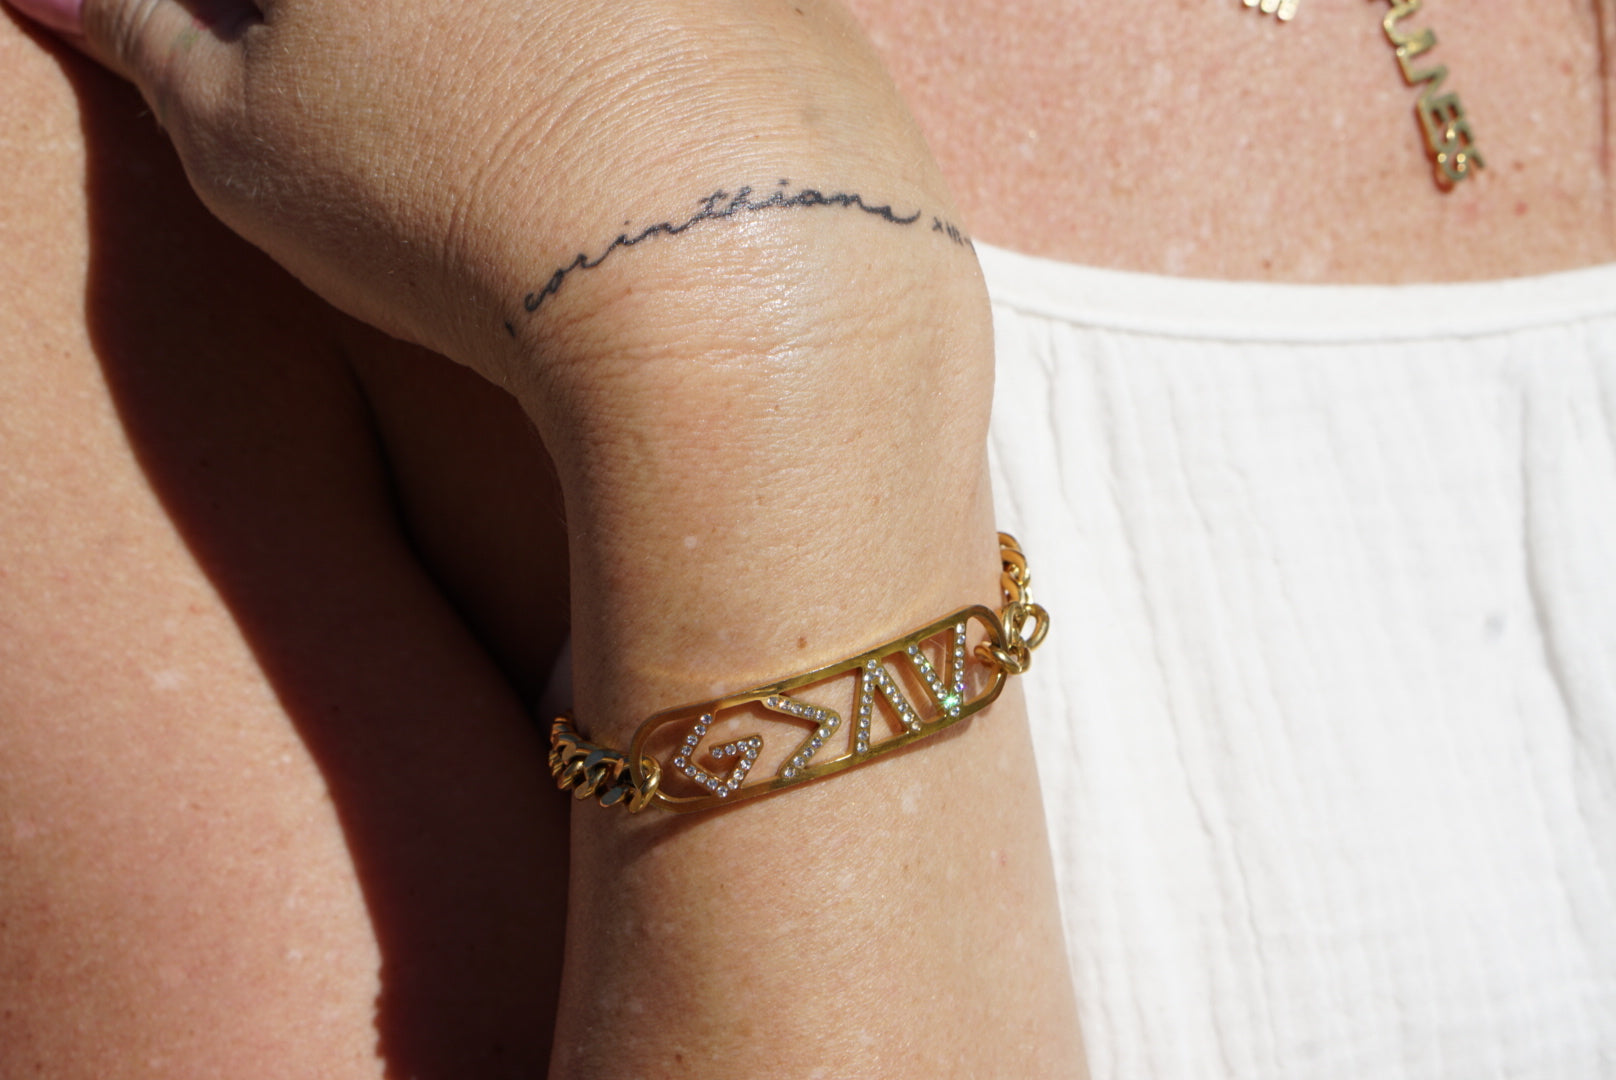 Limited Edition "God is Greater than the Highs & Lows" Crystal Bracelet